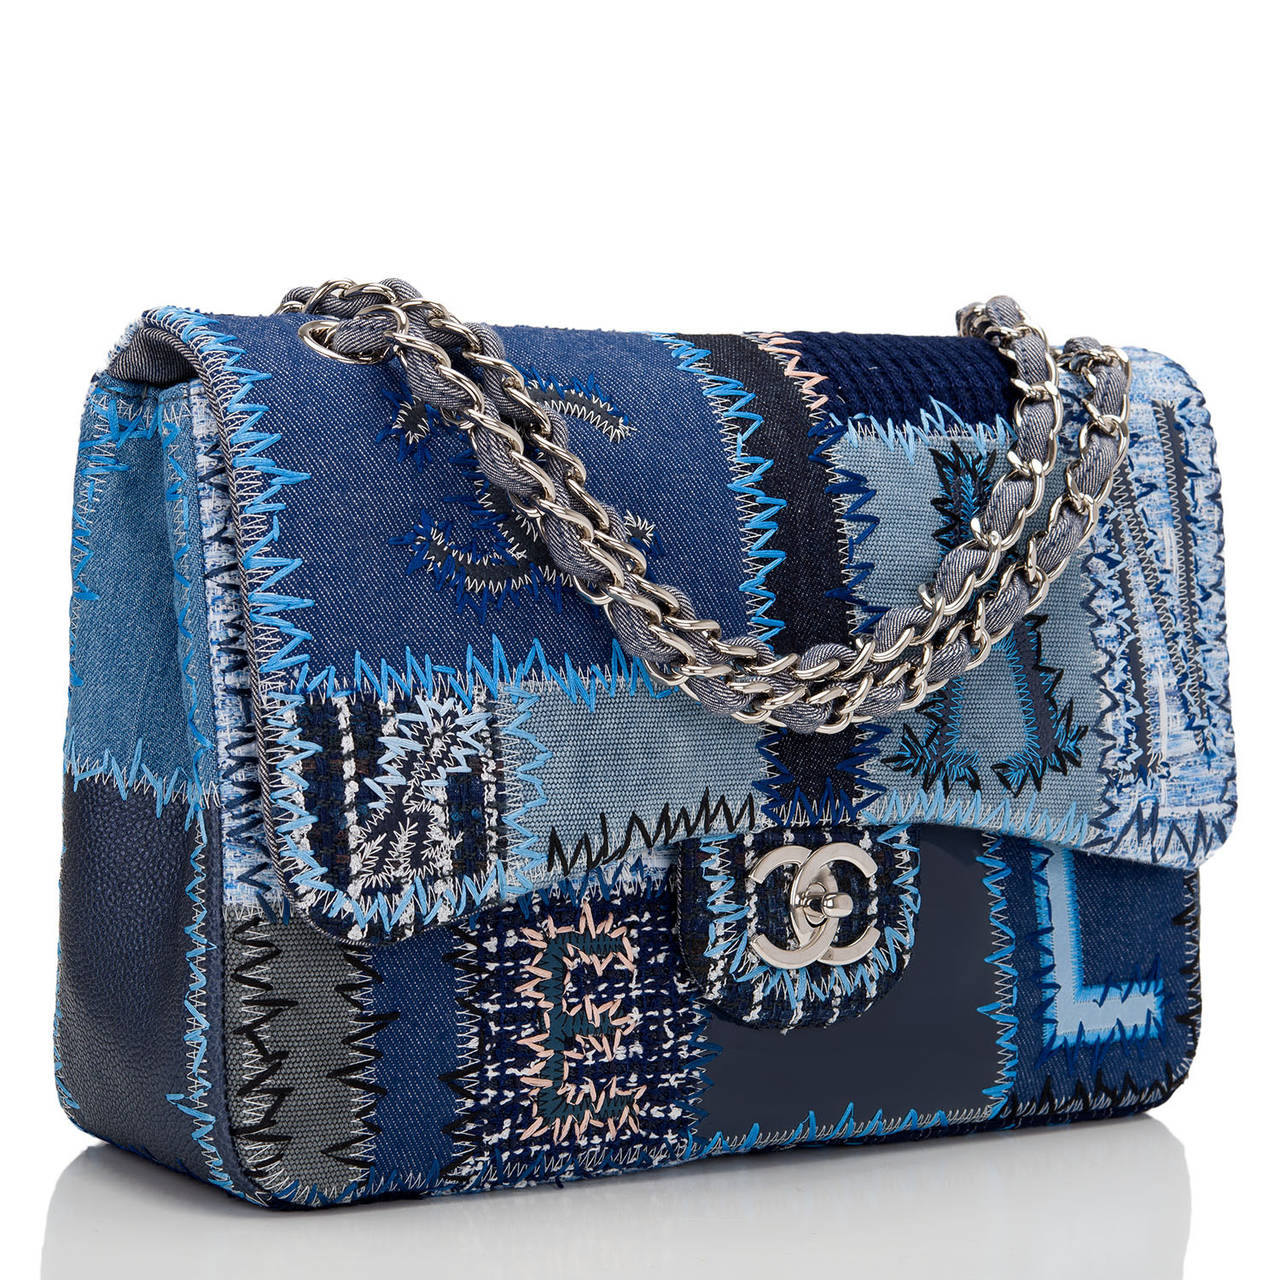 This Patchwork Jumbo Classic flap bag is unique in construction and design. An instant success, the funky and casual styling actual is a masterpiece of workmanship, incorporating numerous denim fabrics, boucle, and colors in a classic style with the